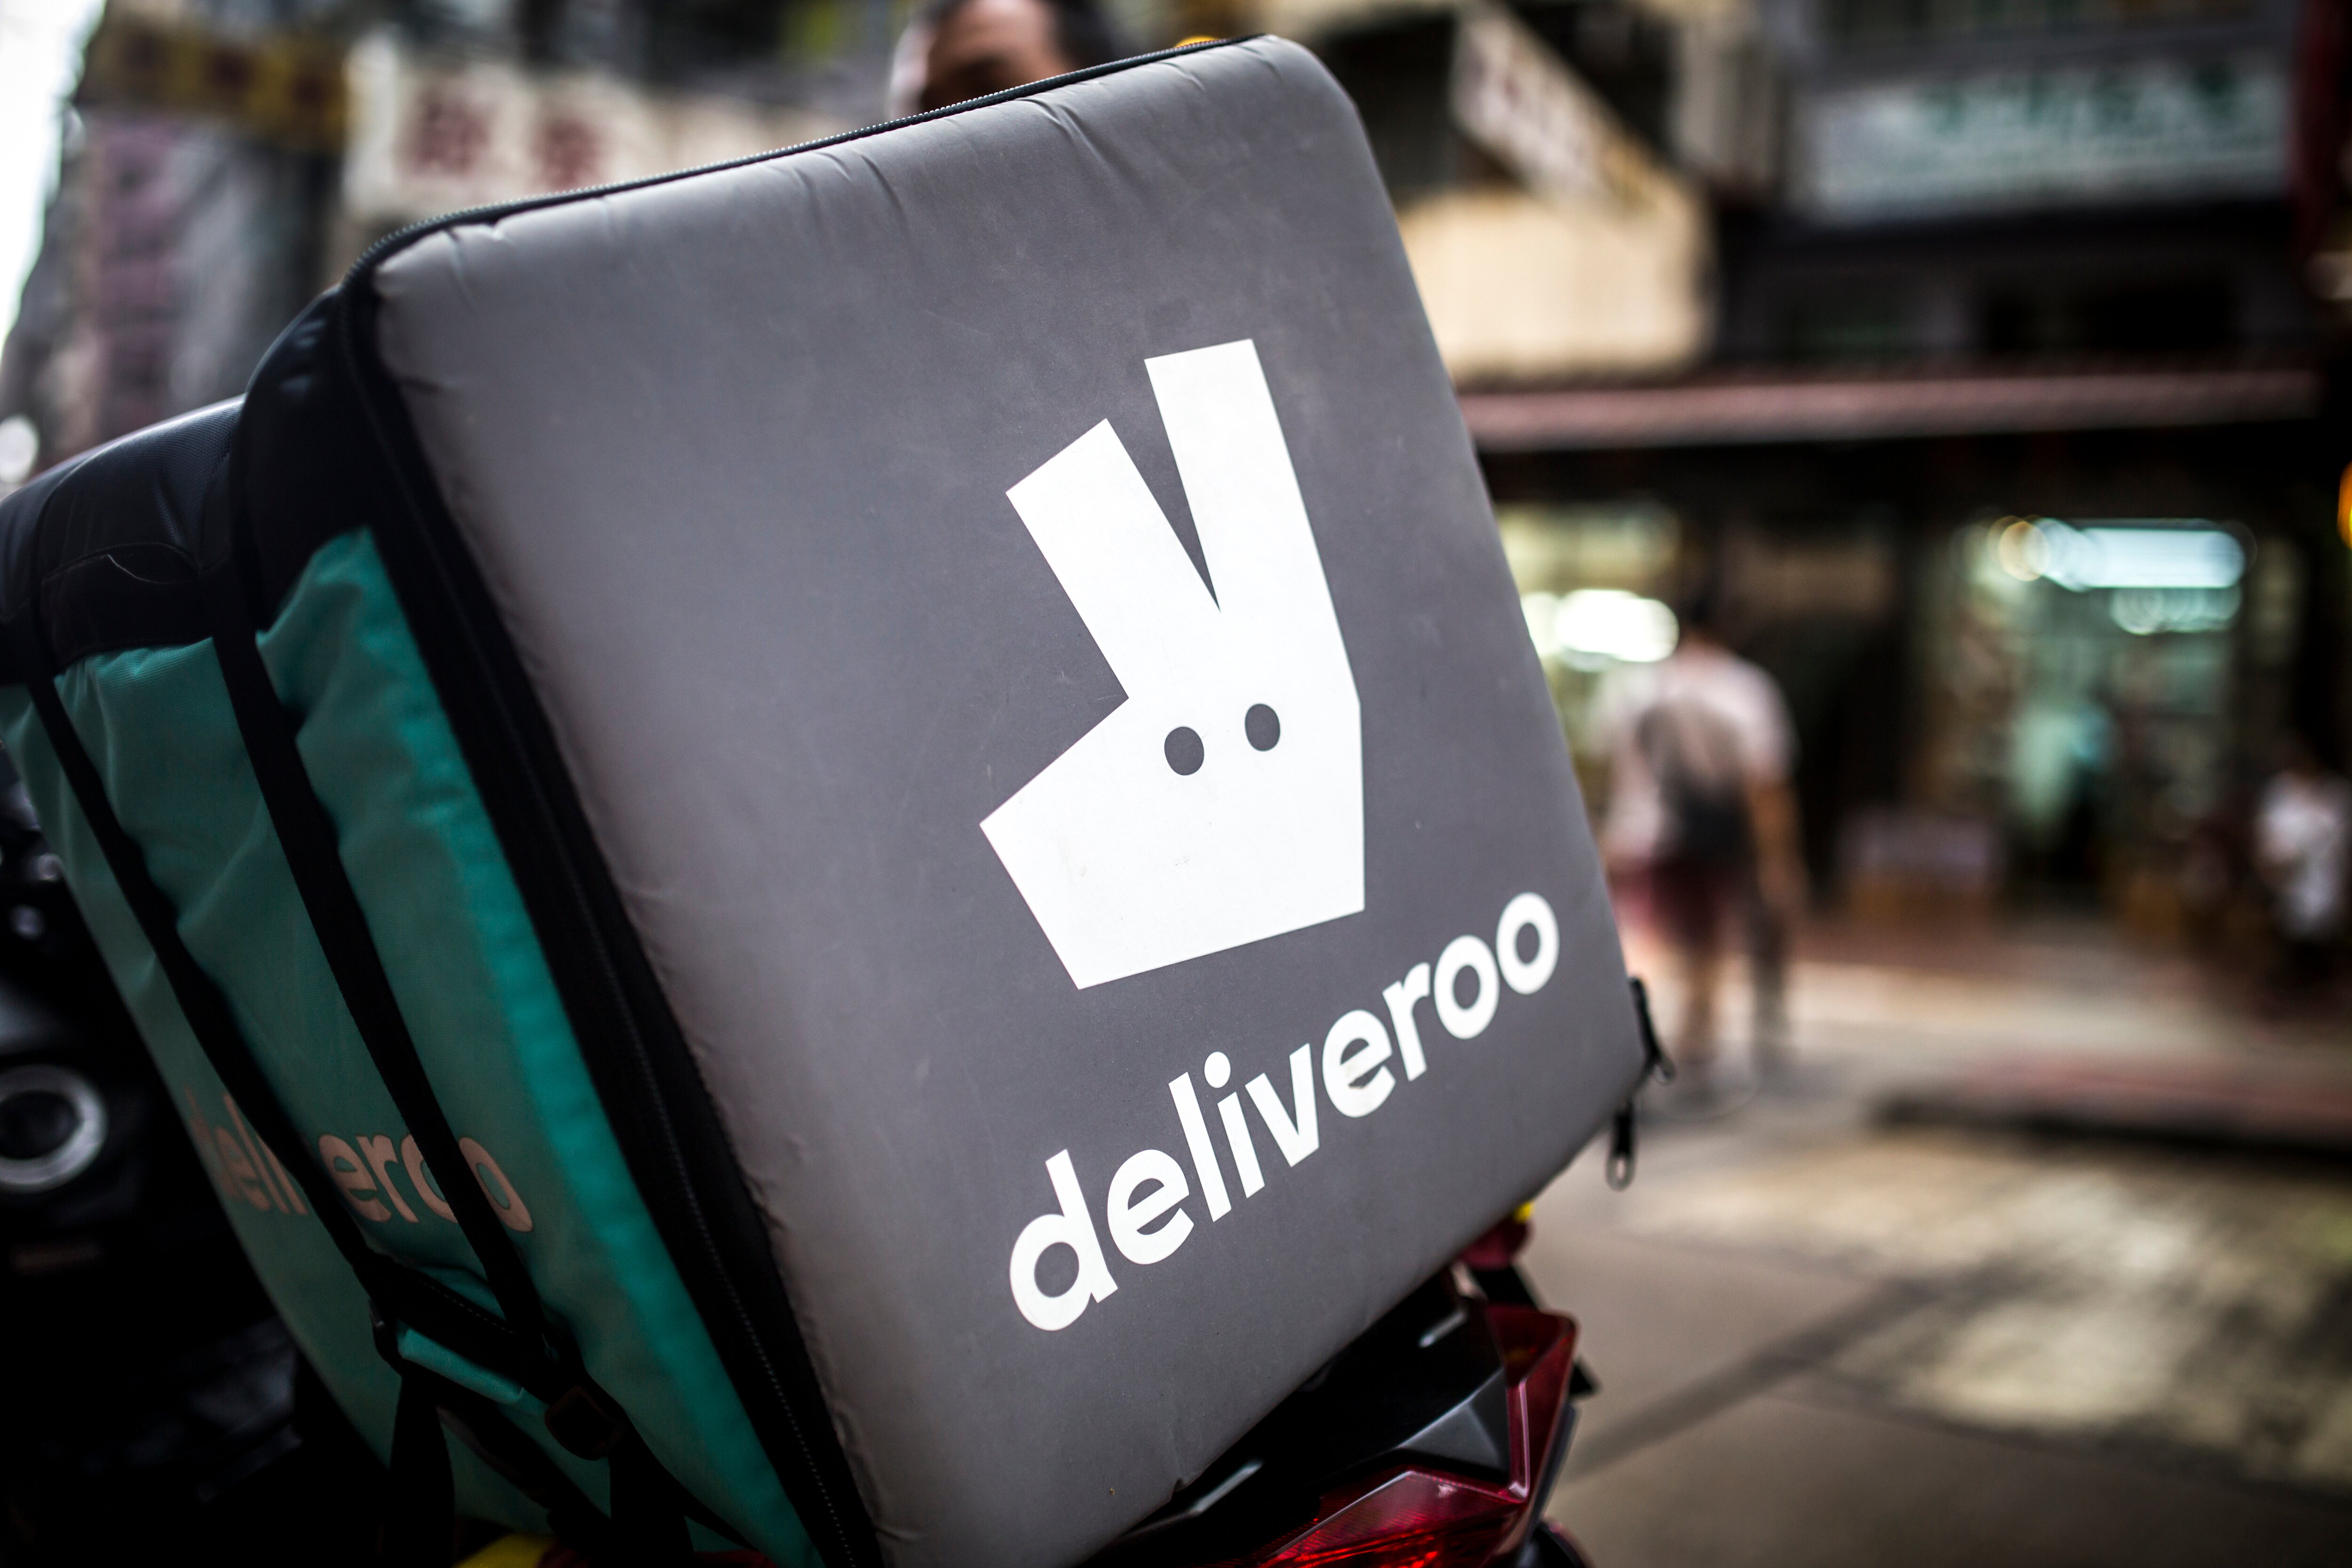 Deliveroo riders are not 'workers', Supreme Court rules